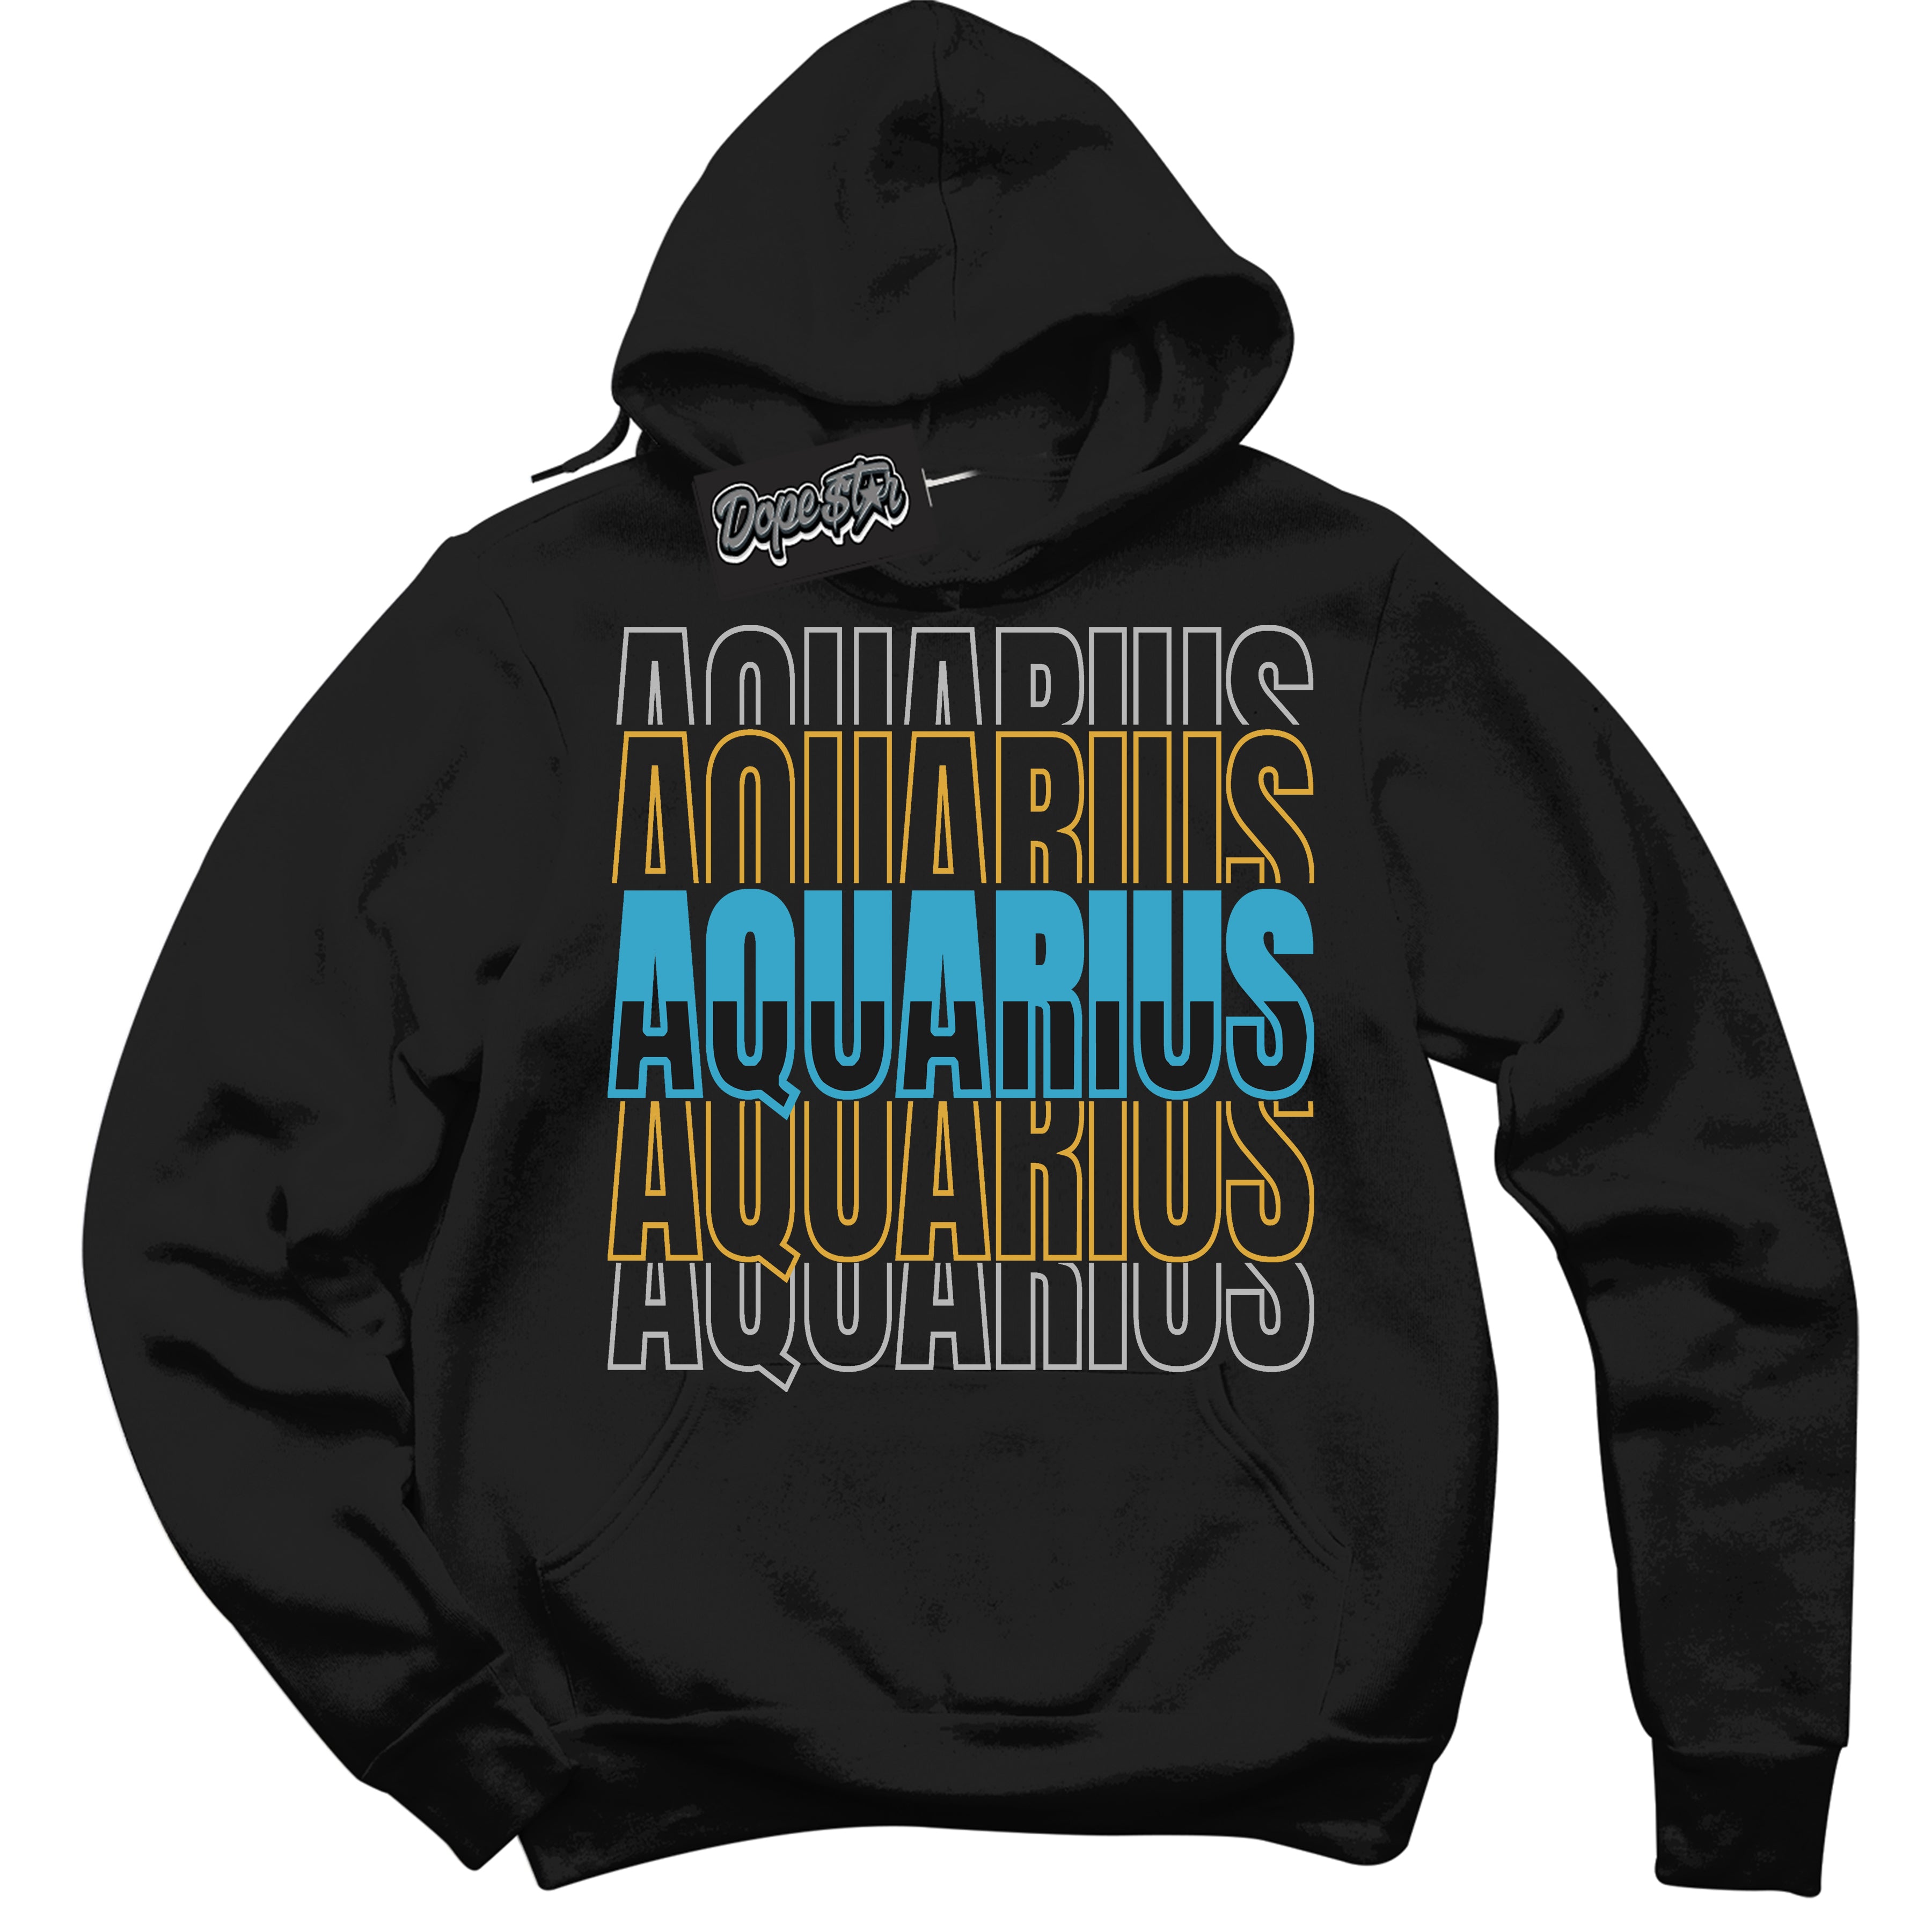 Cool Black Hoodie with “ Aquarius ”  design that Perfectly Matches Aqua 5s Sneakers.